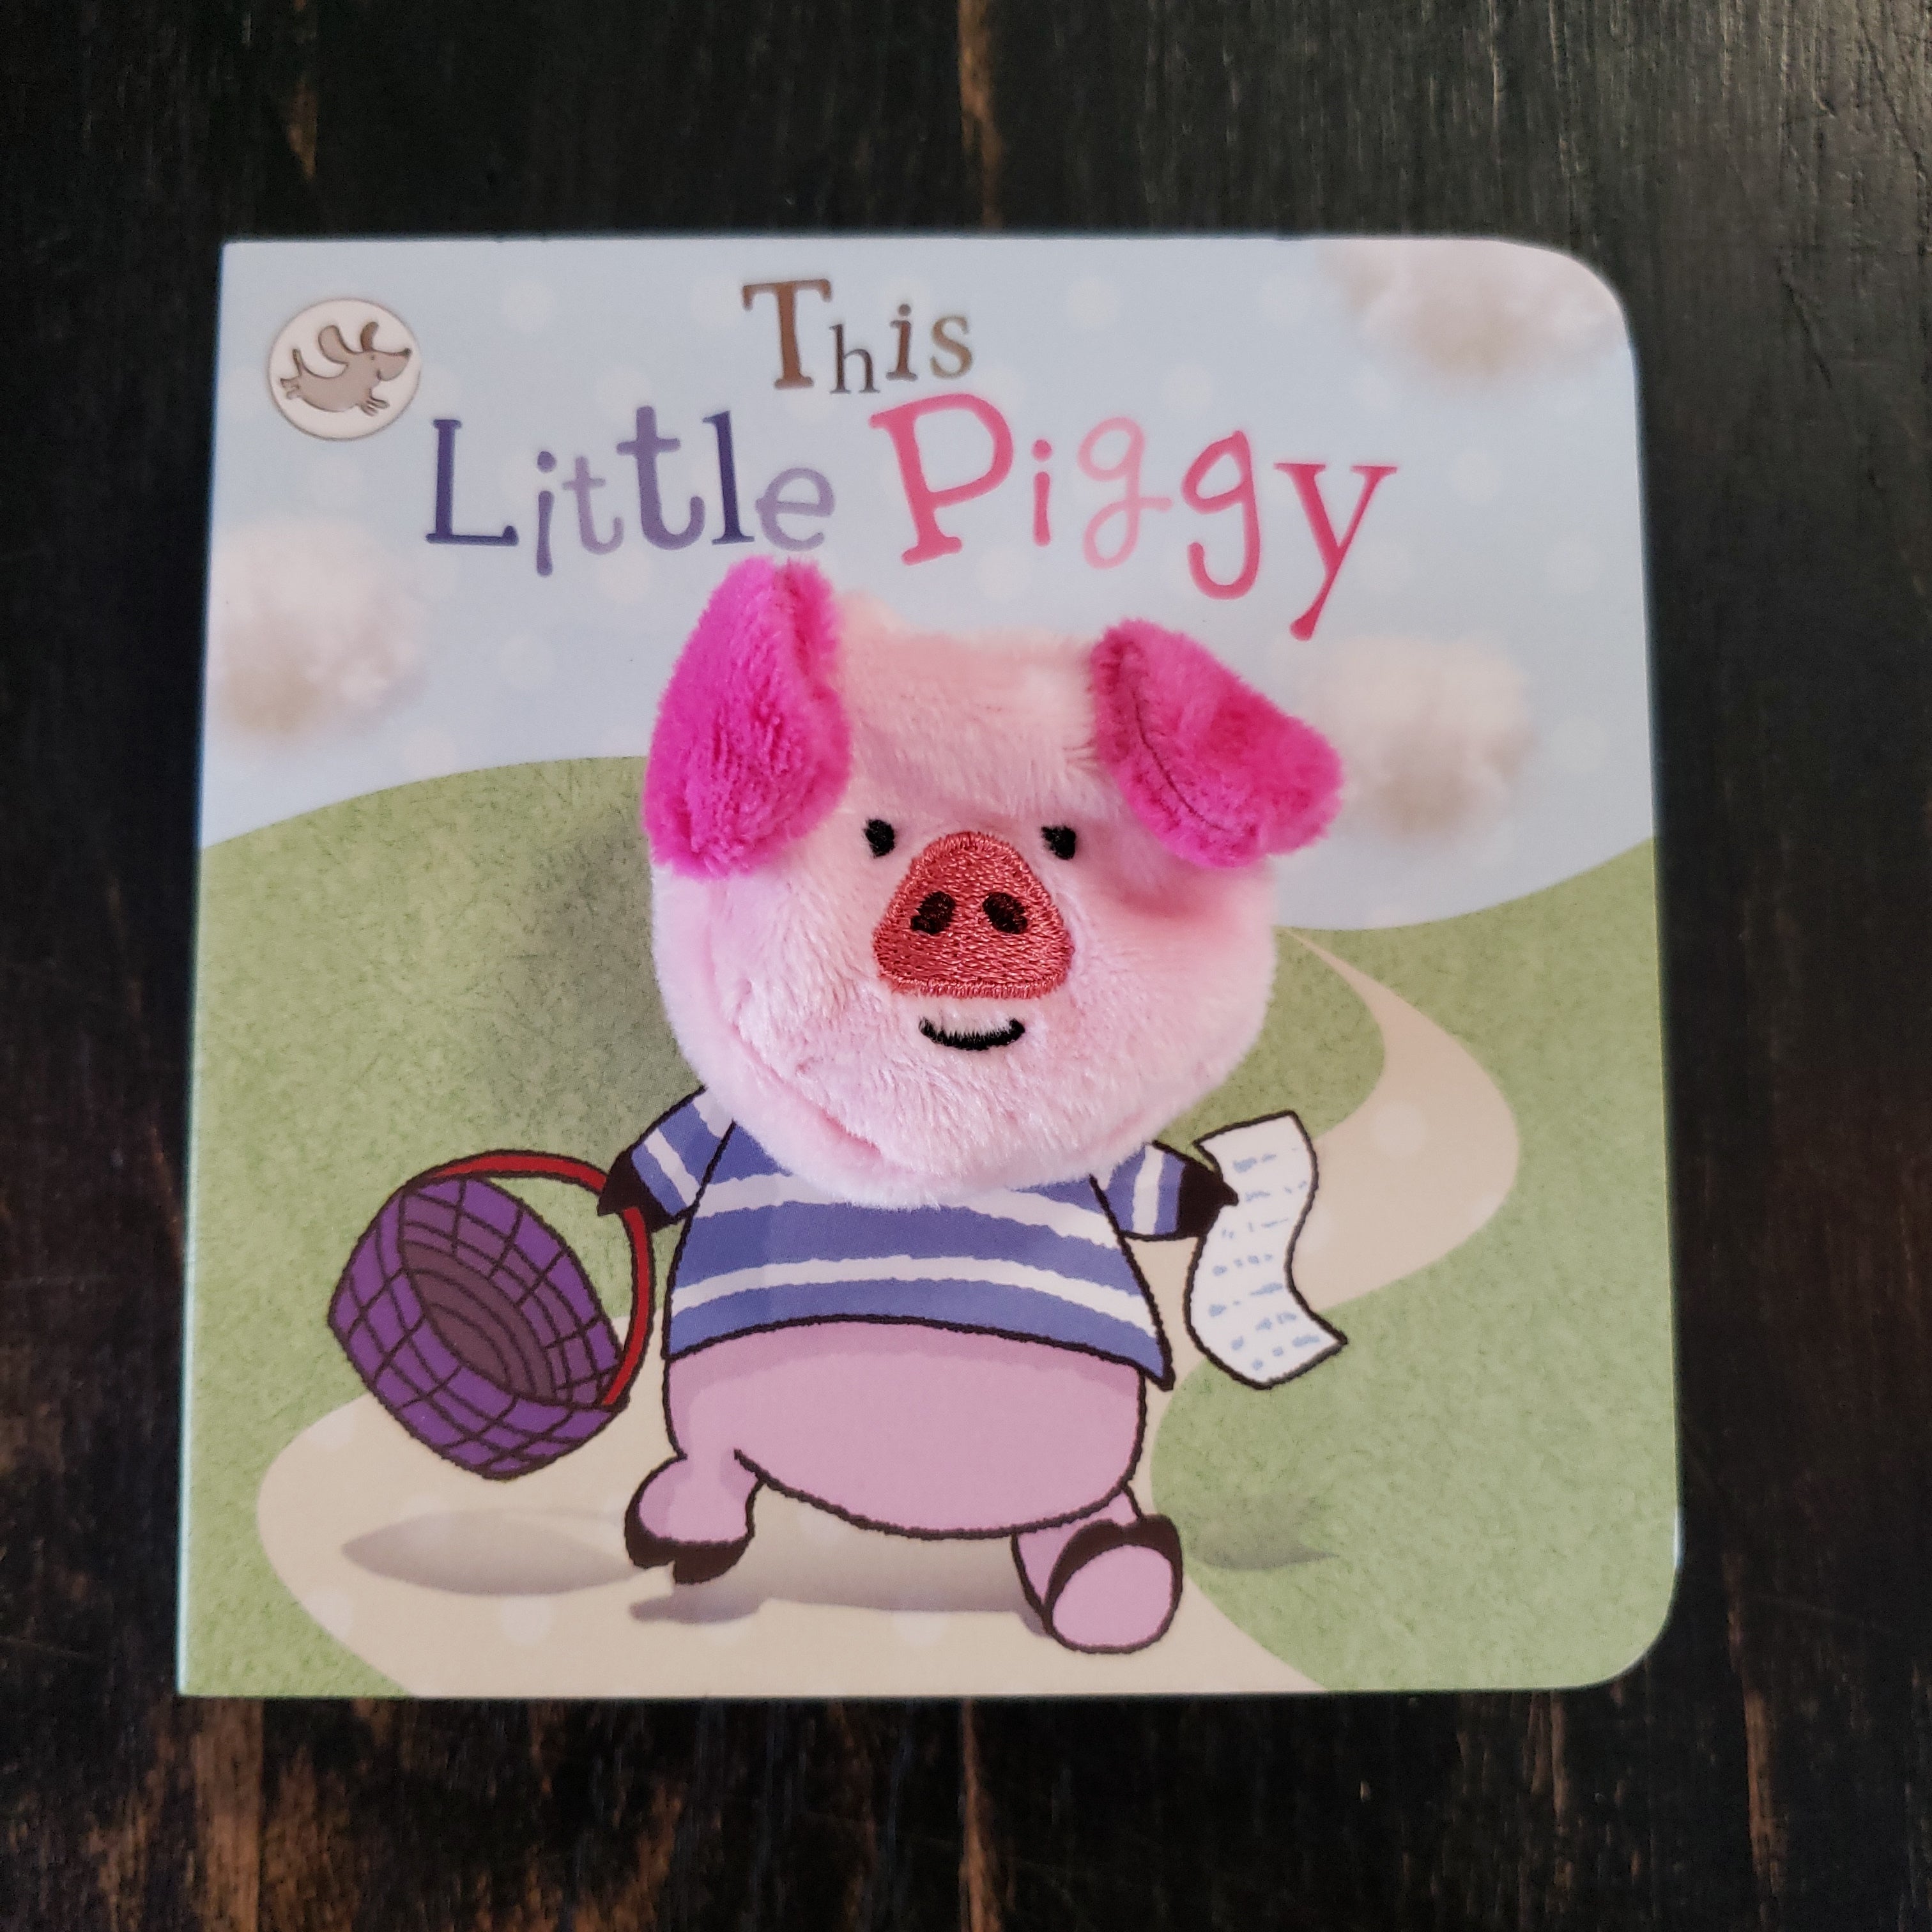 This little piggy chunky book